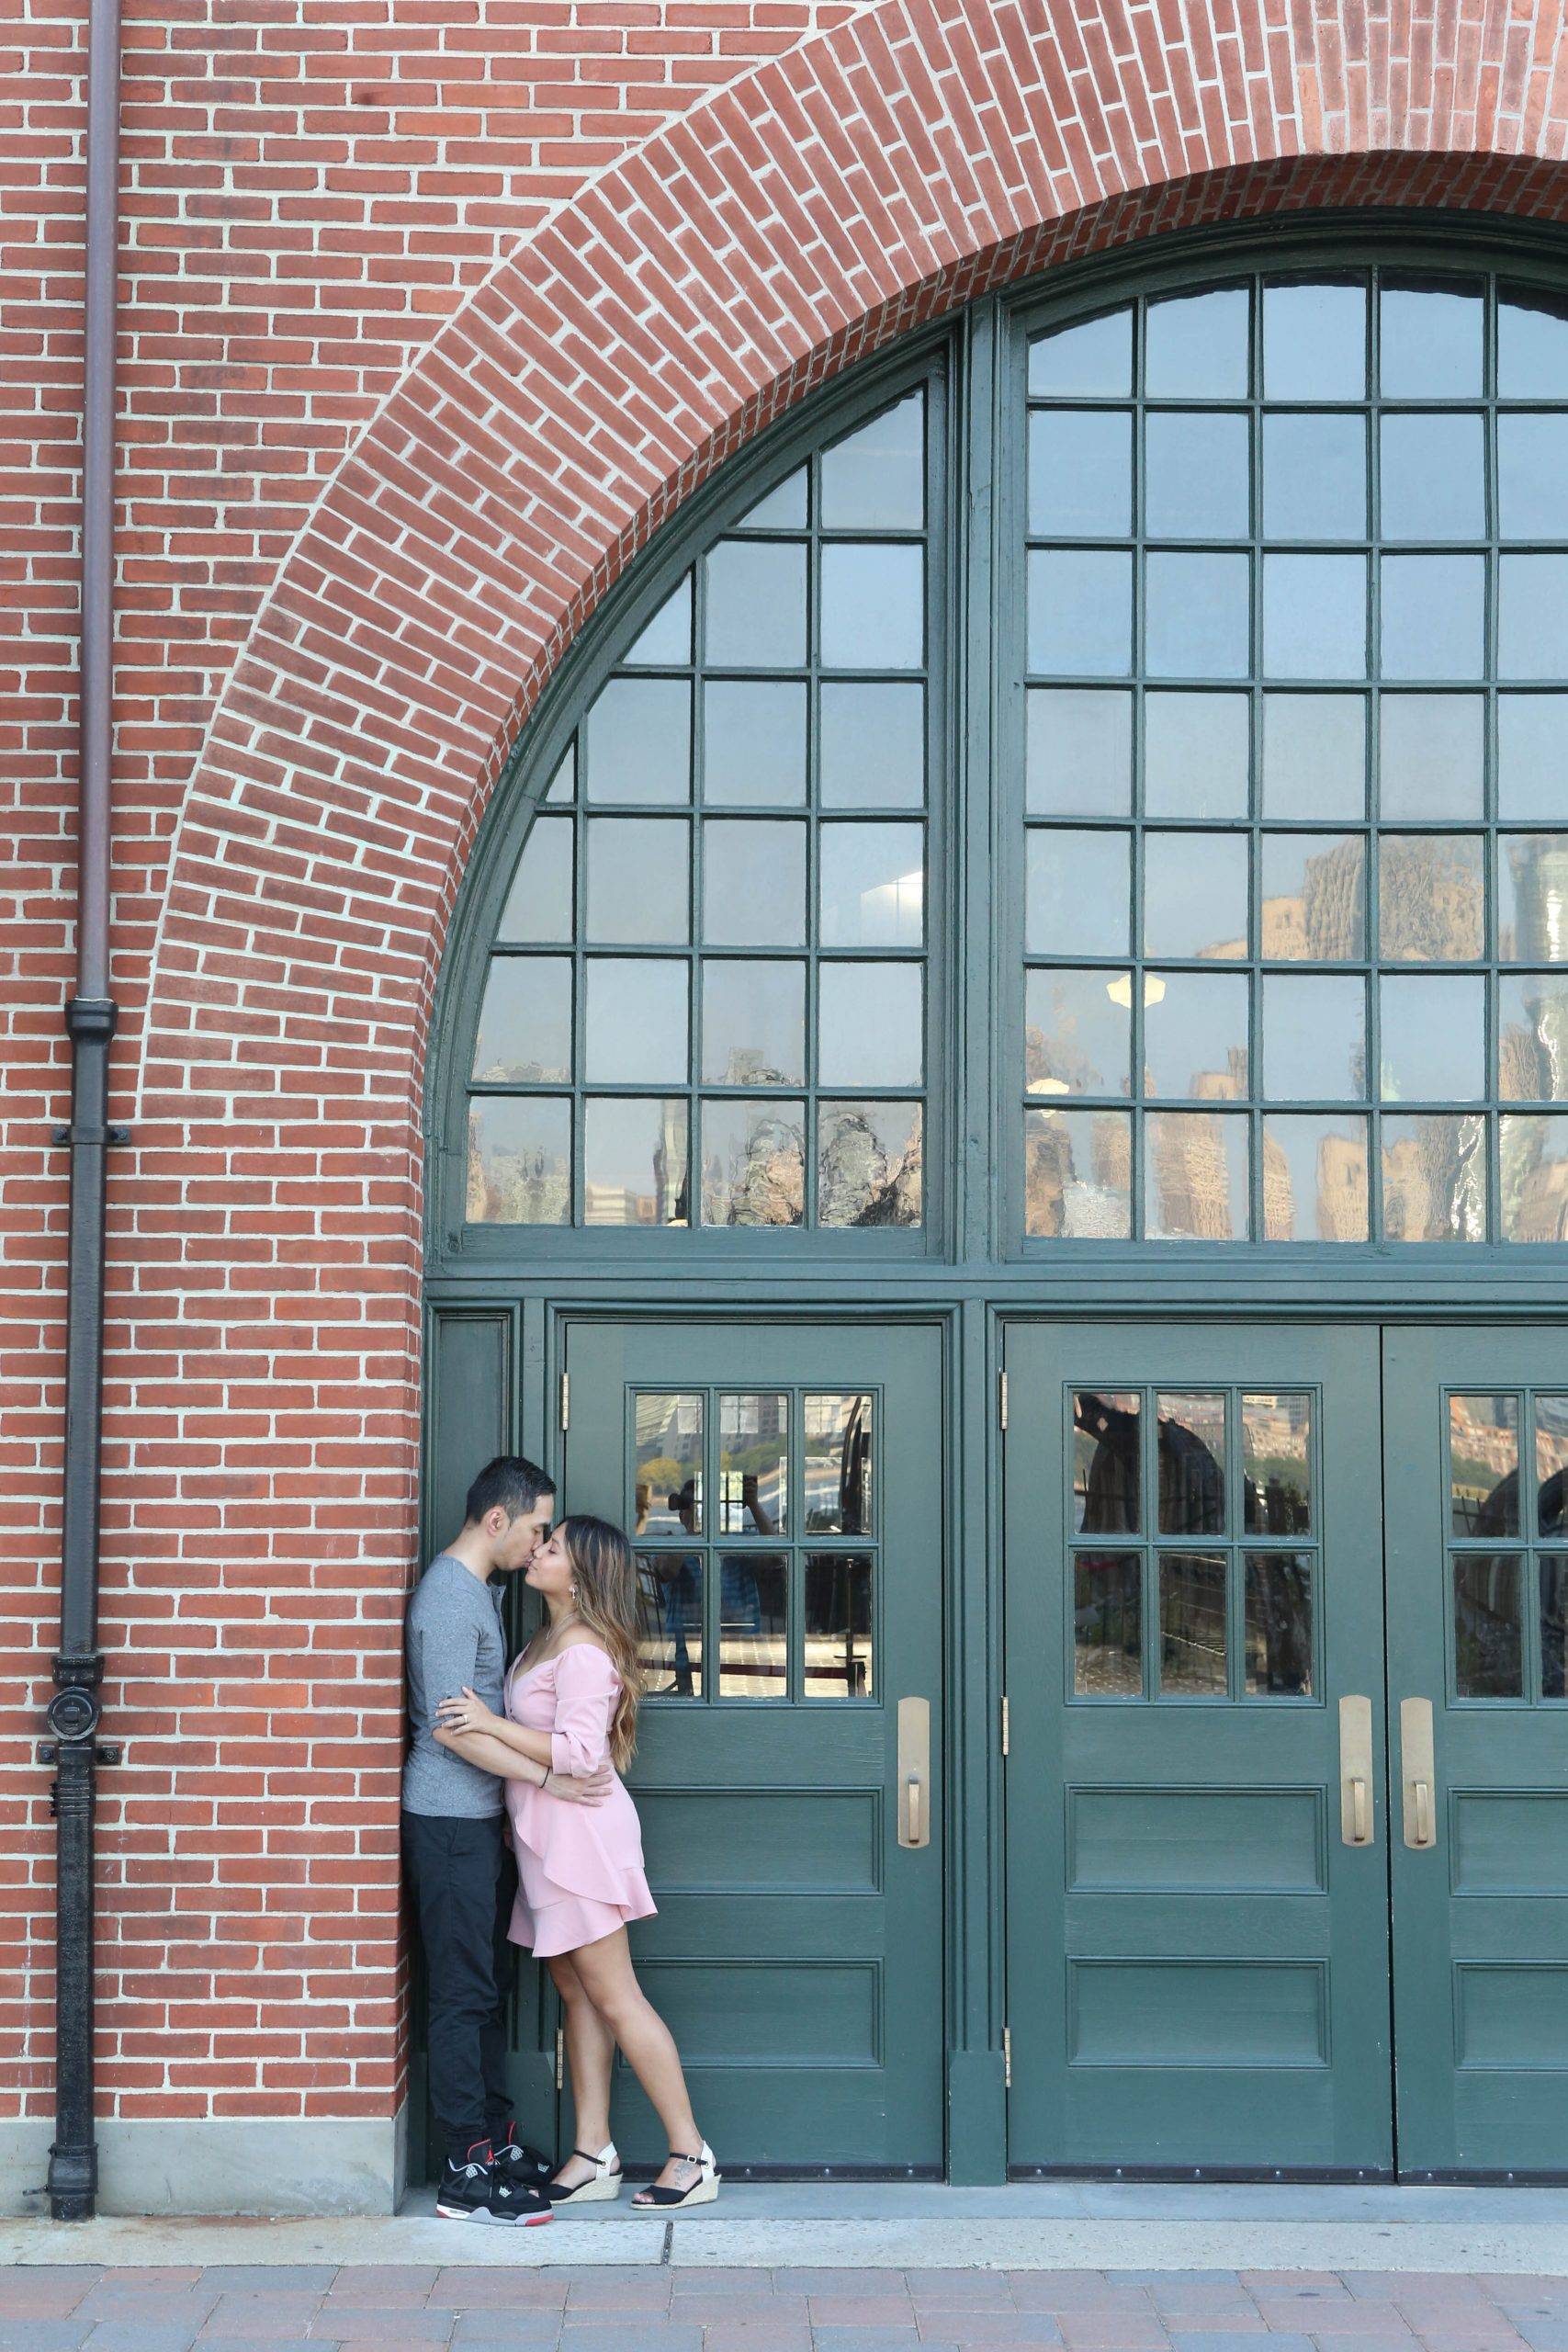 A couple kisses in front of a red brick building.